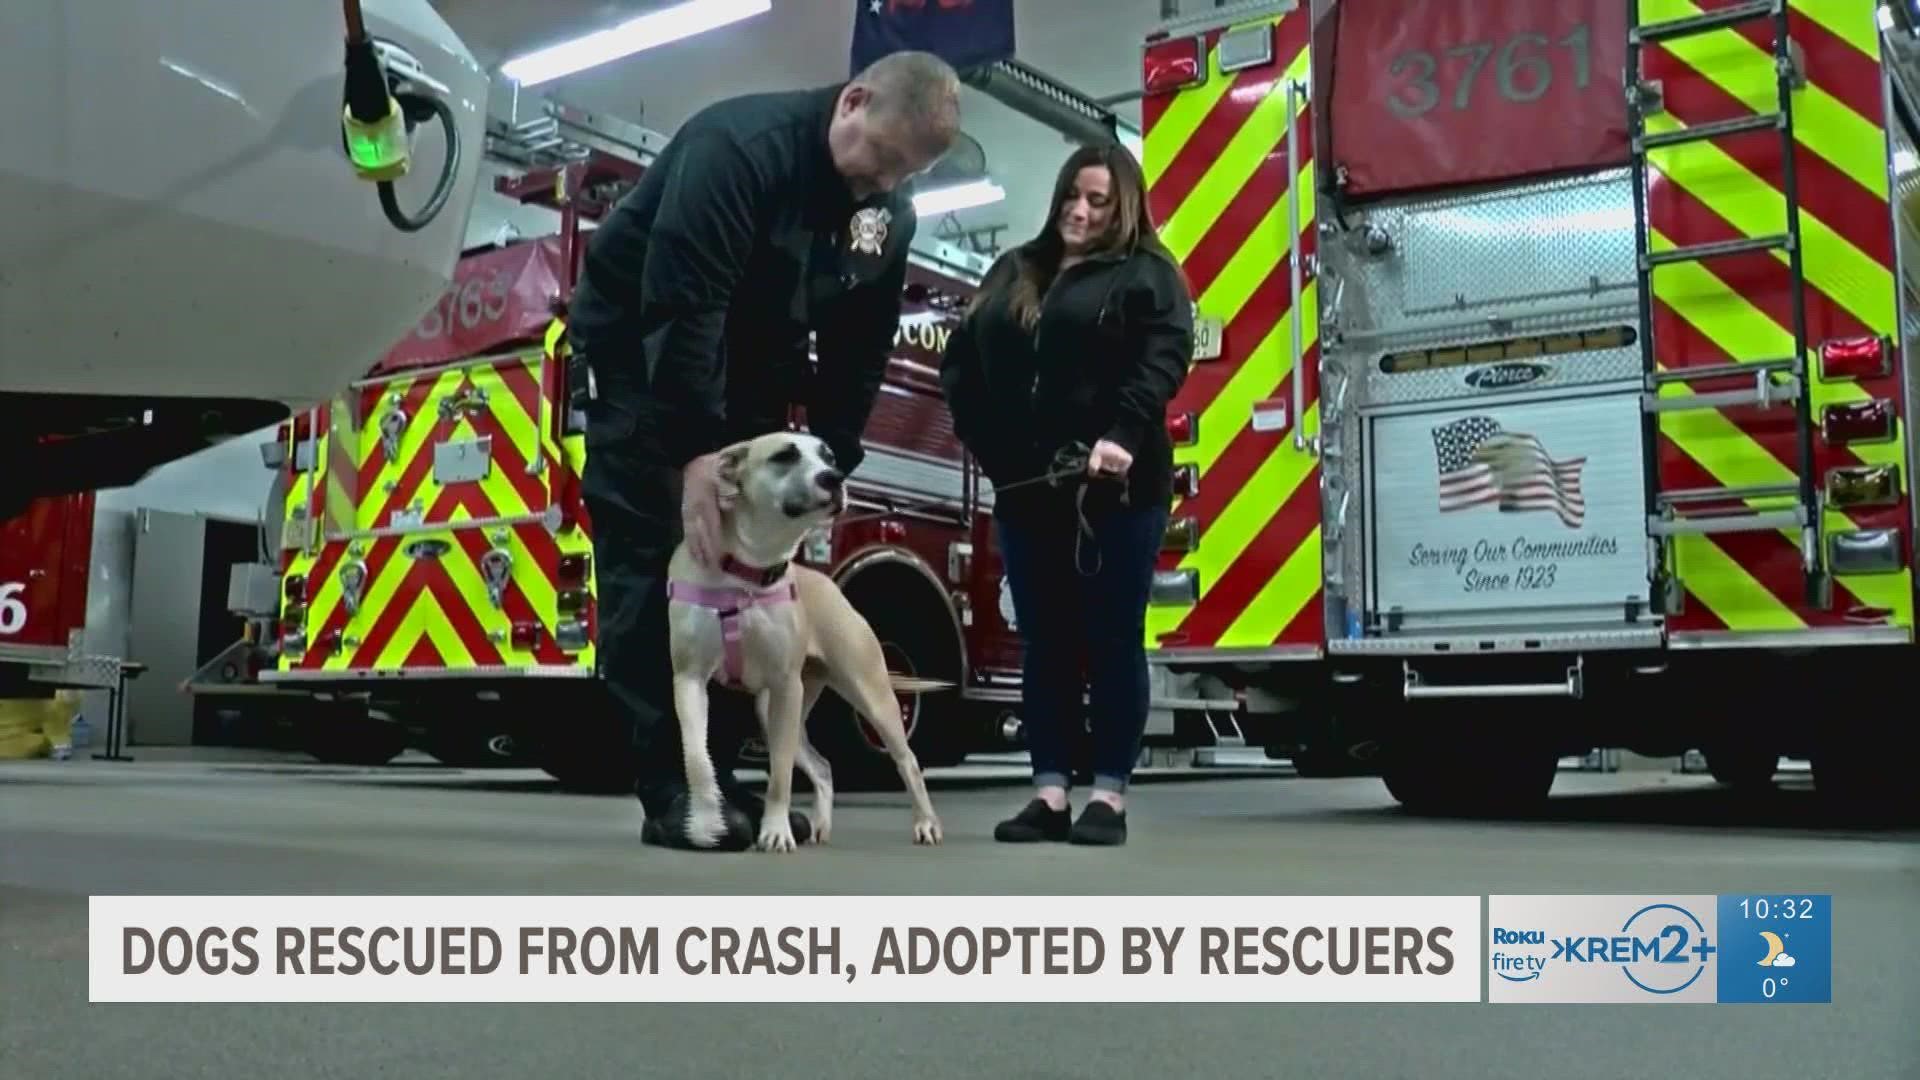 Miraculously, 53 dogs and three people survived. Three firefighters in the rescue effort ended up taking a dog of their own.